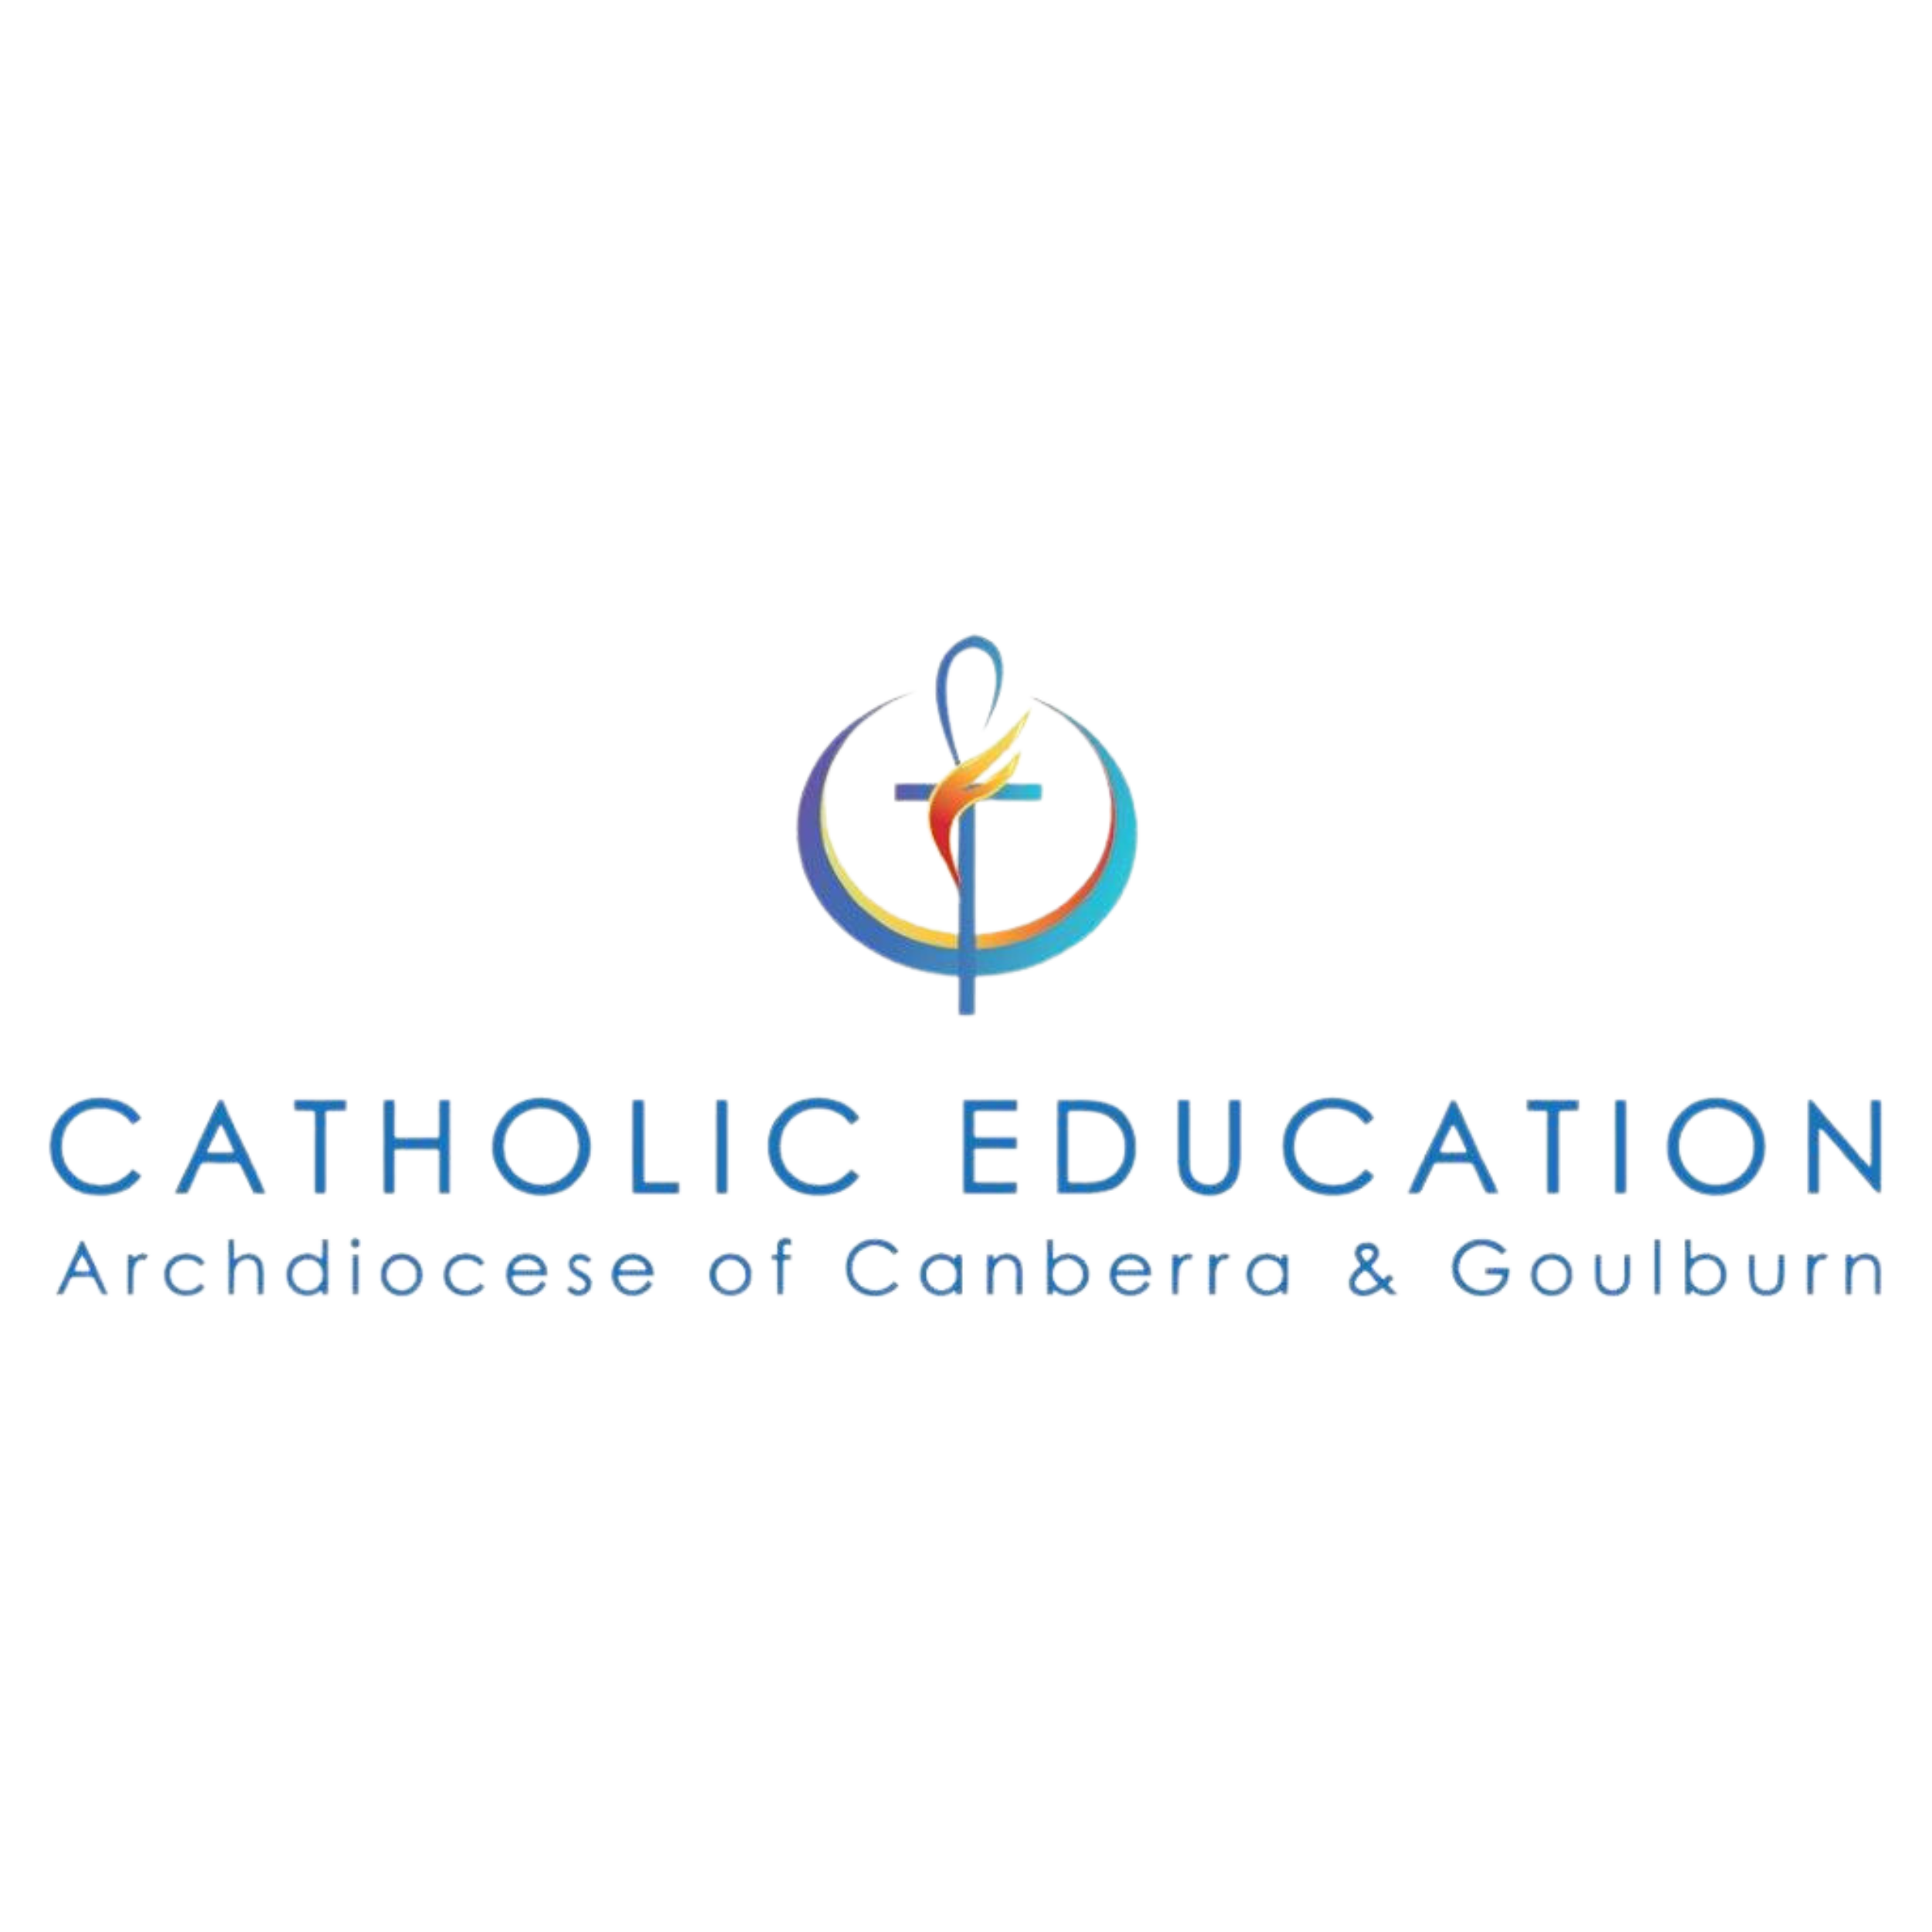 Catholic Education Archdiocese of Canberra & Goulburn : Brand Short Description Type Here.